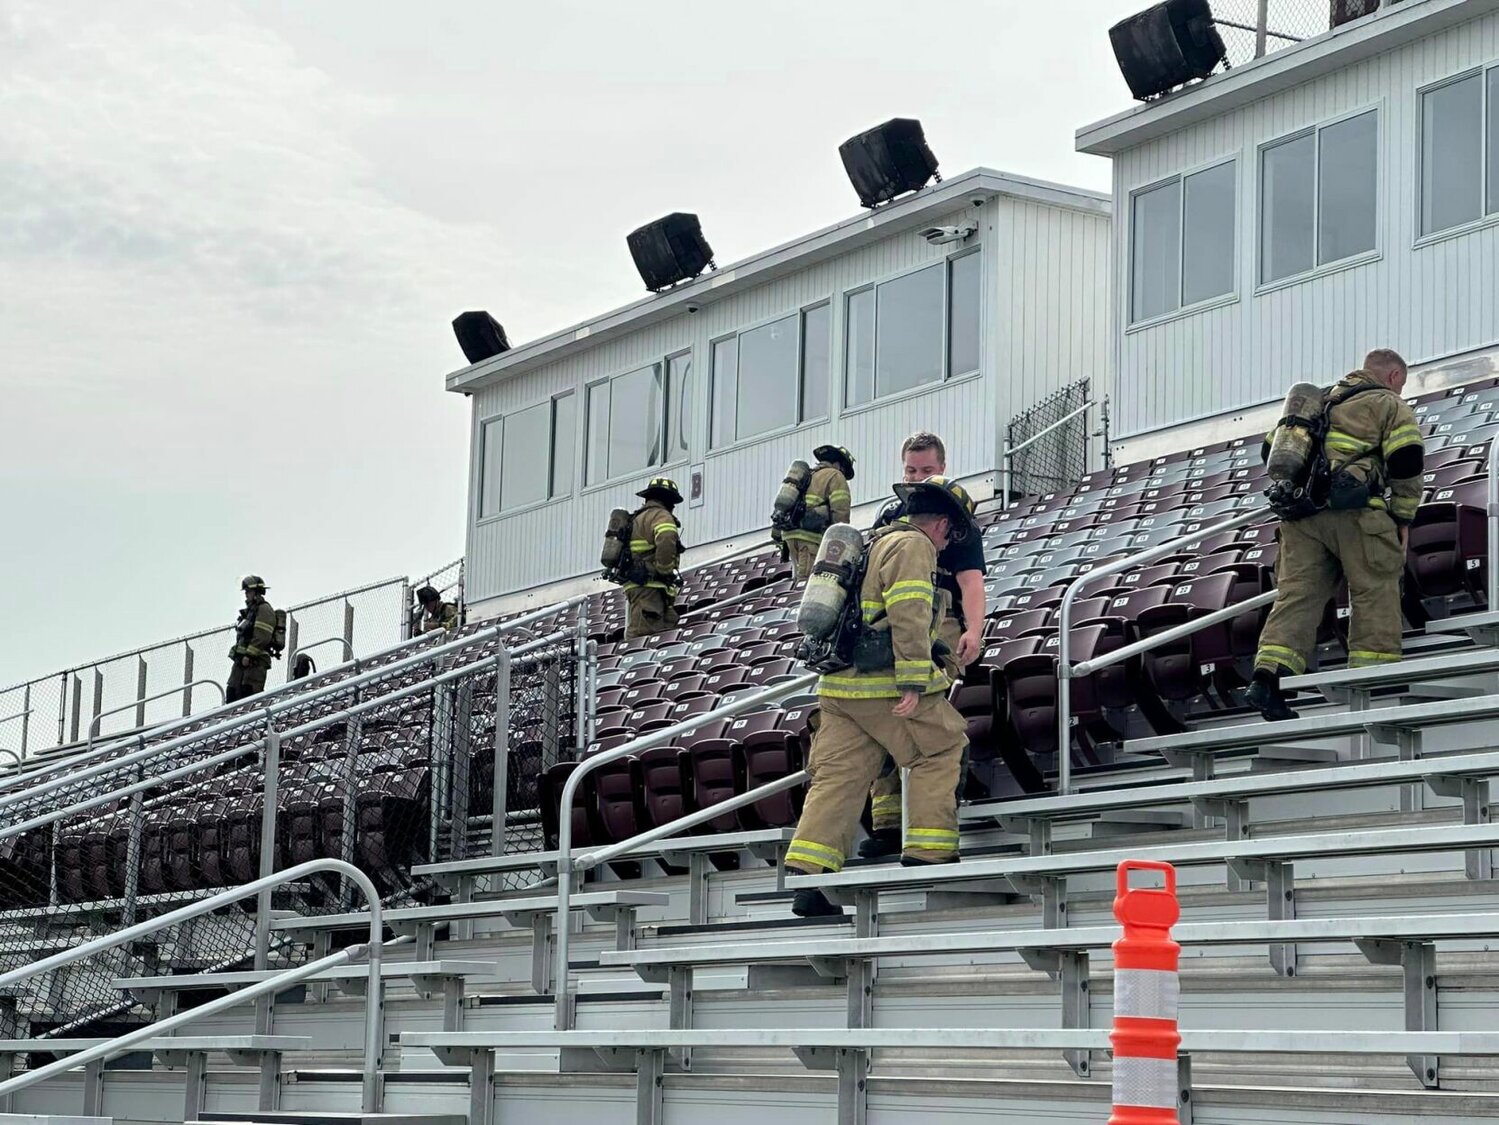 Crews were fully dressed as they completed the stair climb in Rogersville during Monday's remembrance of 9/11.